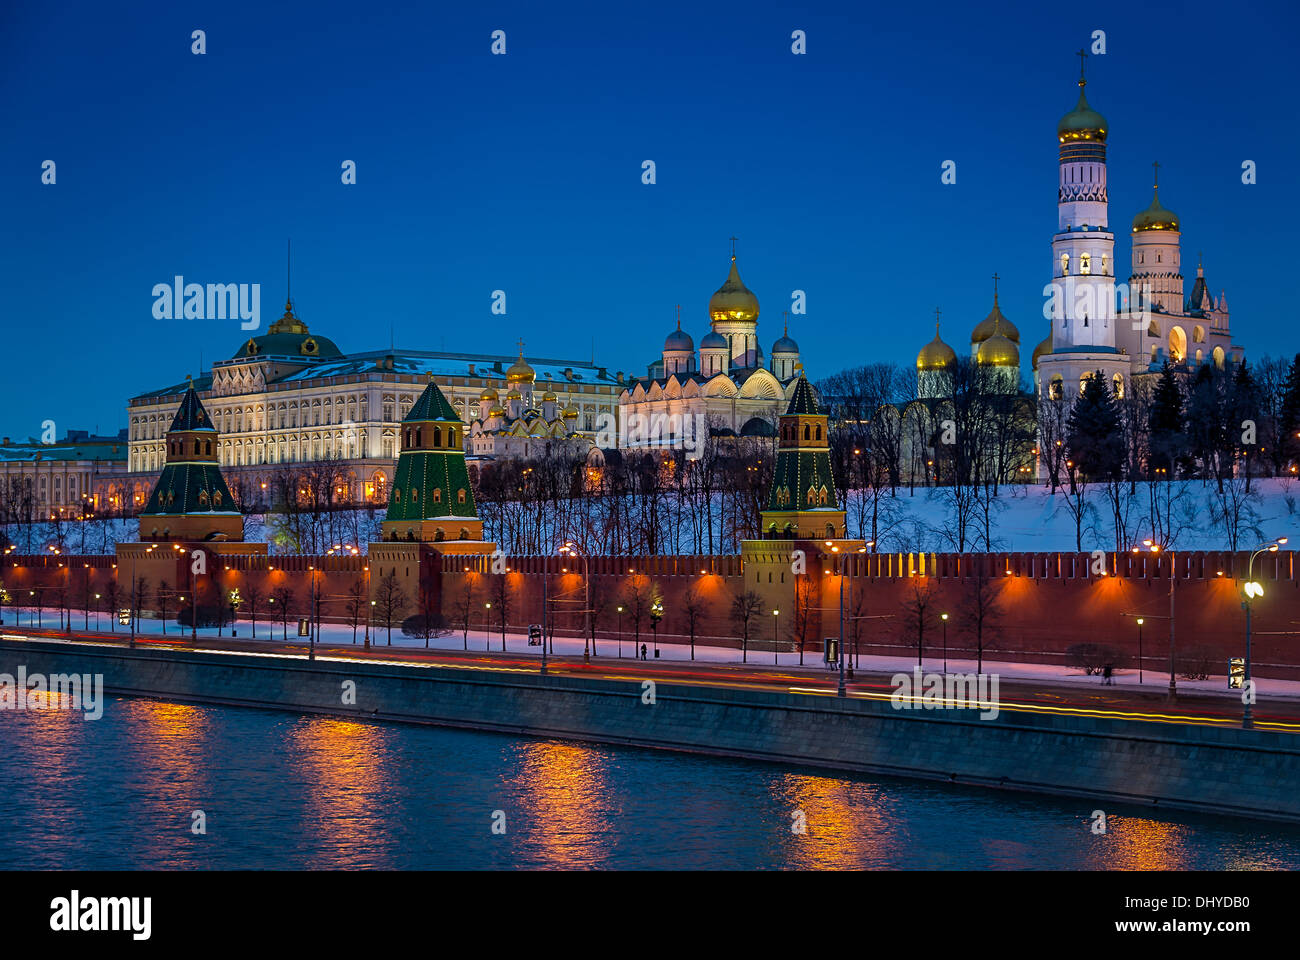 Close up view of Kremlin from the banks of the Moskva River in Moscow at night in Russian Federation Stock Photo